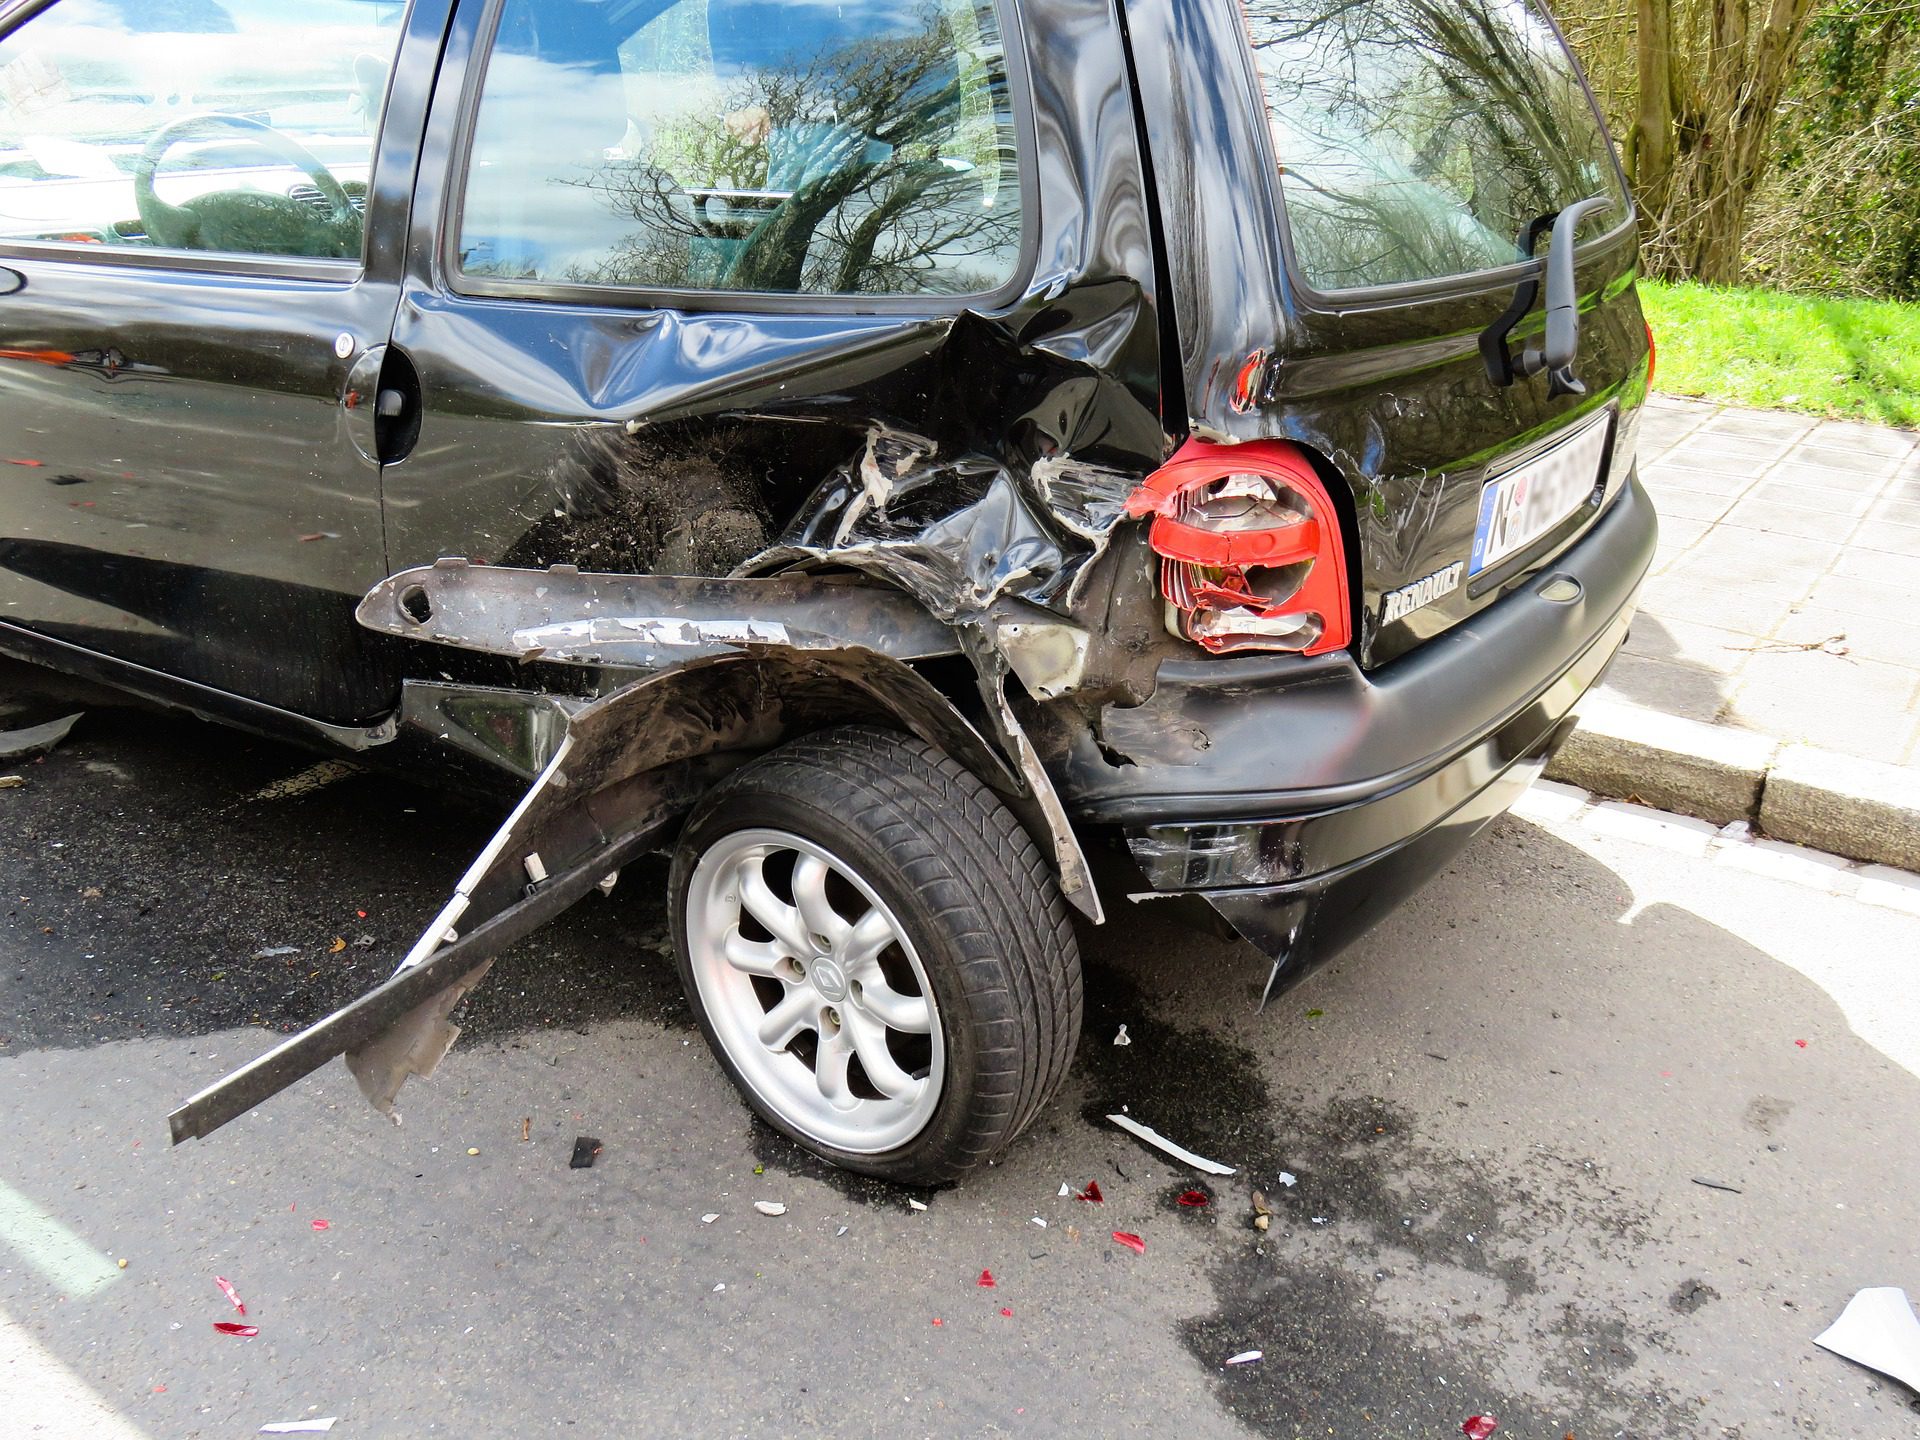 I was in a car accident, now what?